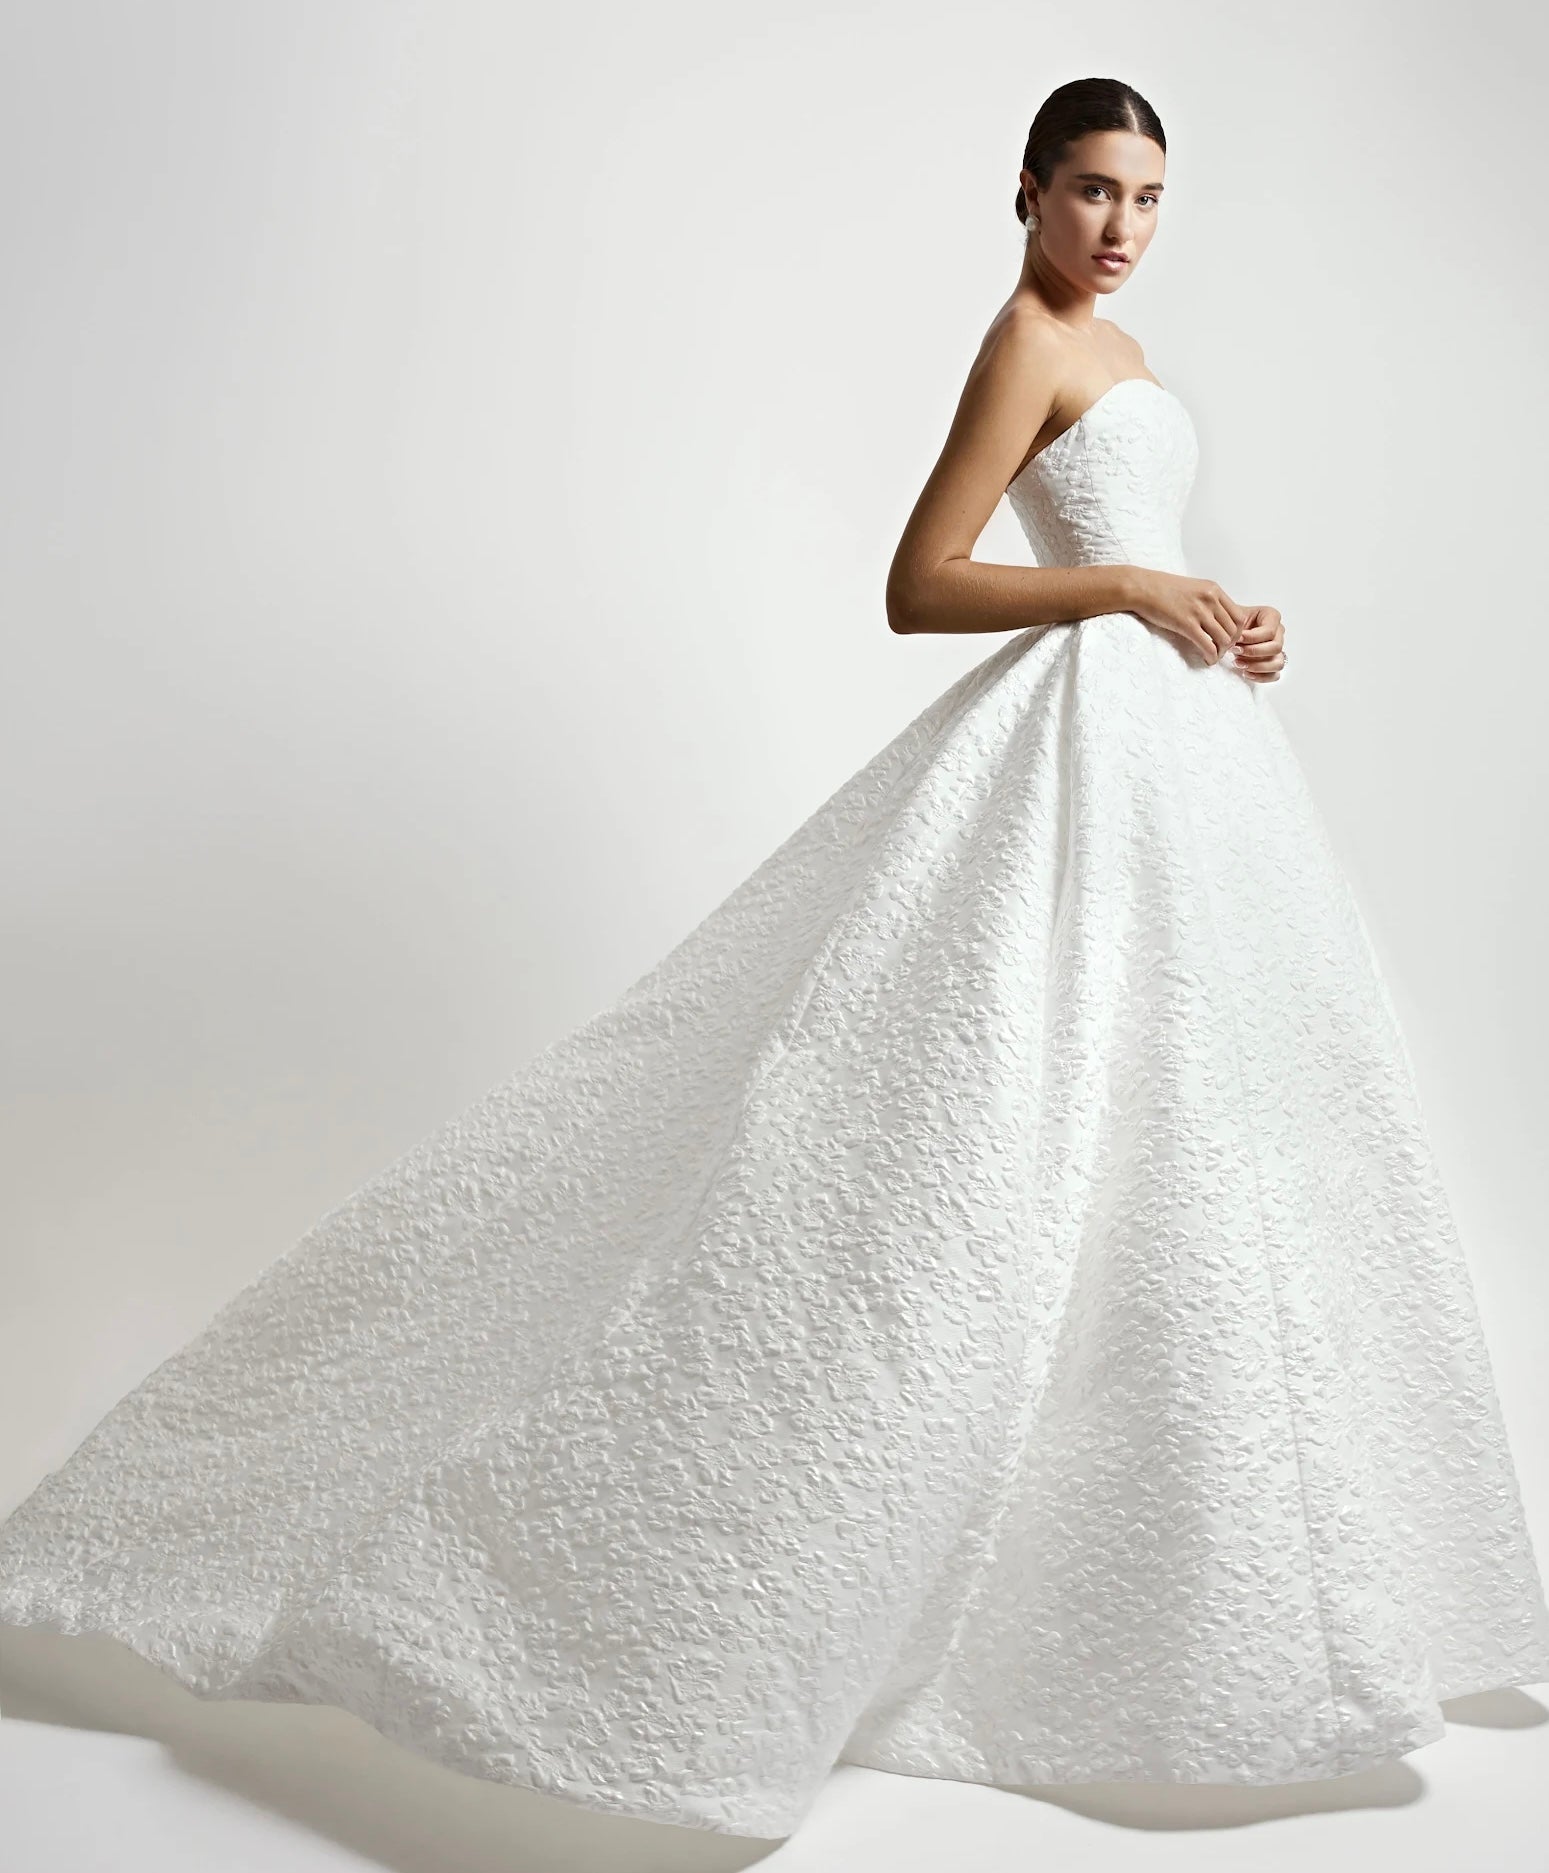 Timeless And Romantic Strapless Jacquard Ball Gown by Jaclyn Whyte - Image 1